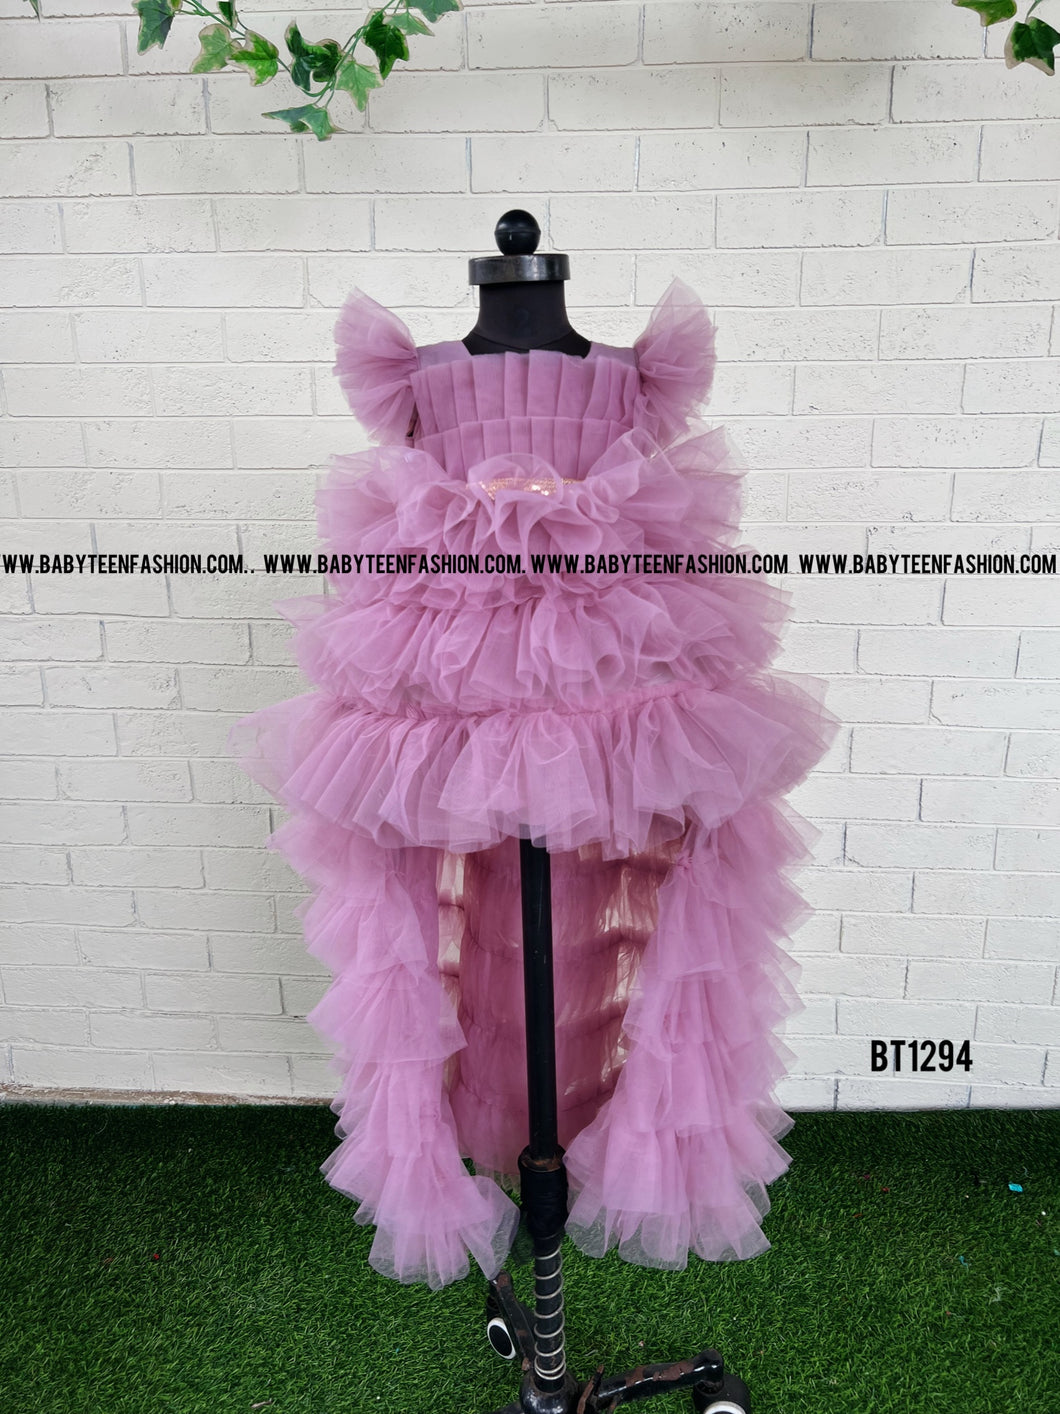 BT1294 Pink Blossom Gown - Baby's Gala Dress